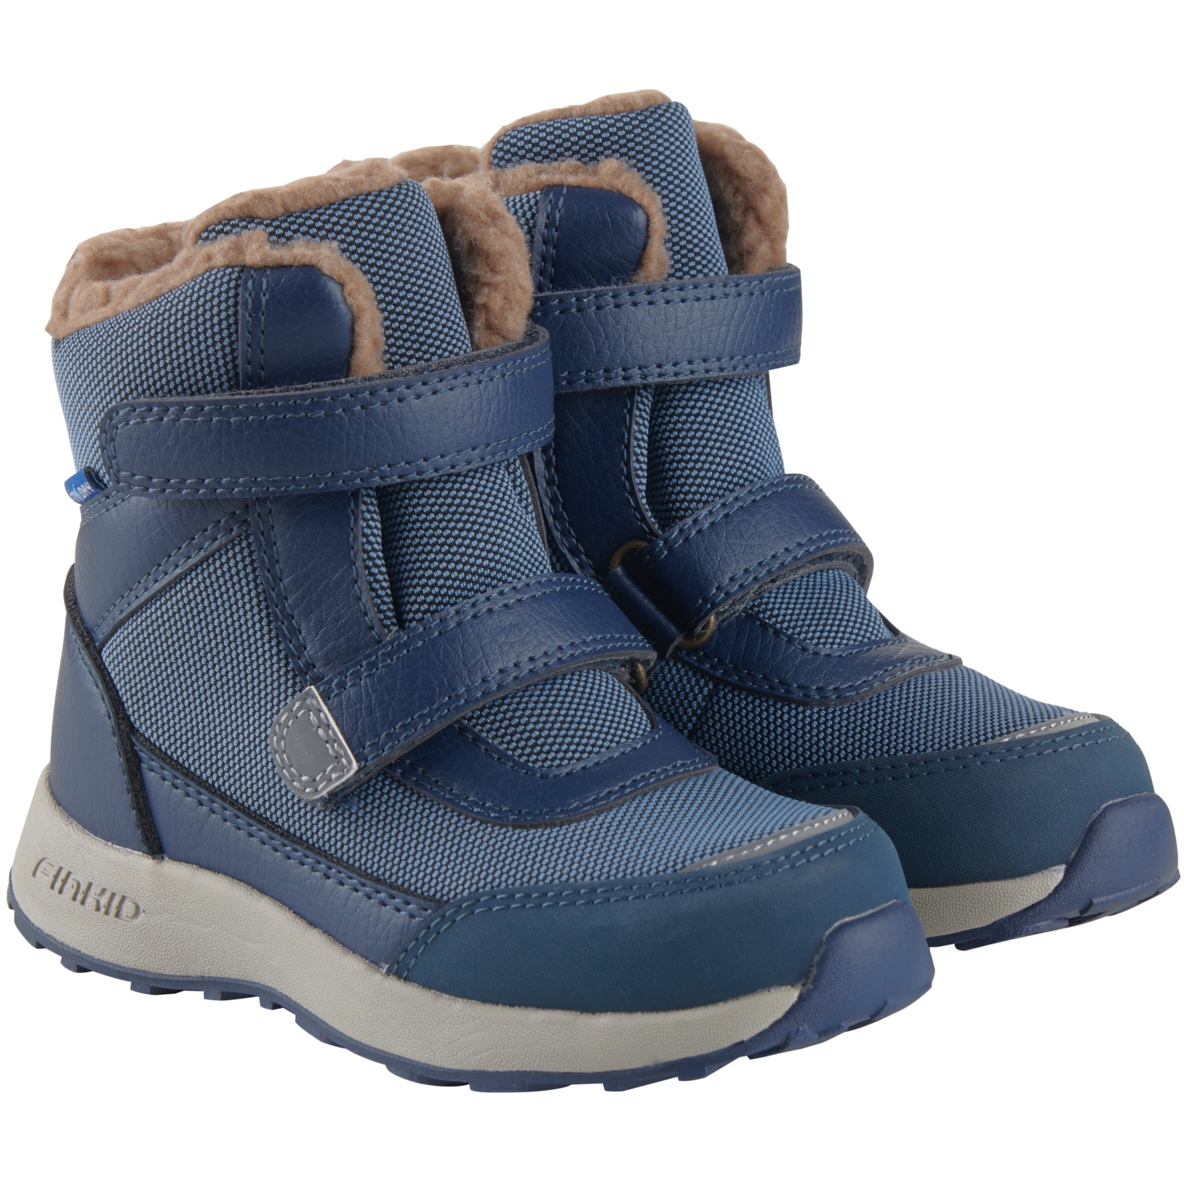 Picture of Finkid LAPPI Kids Winter Boots - dove/navy